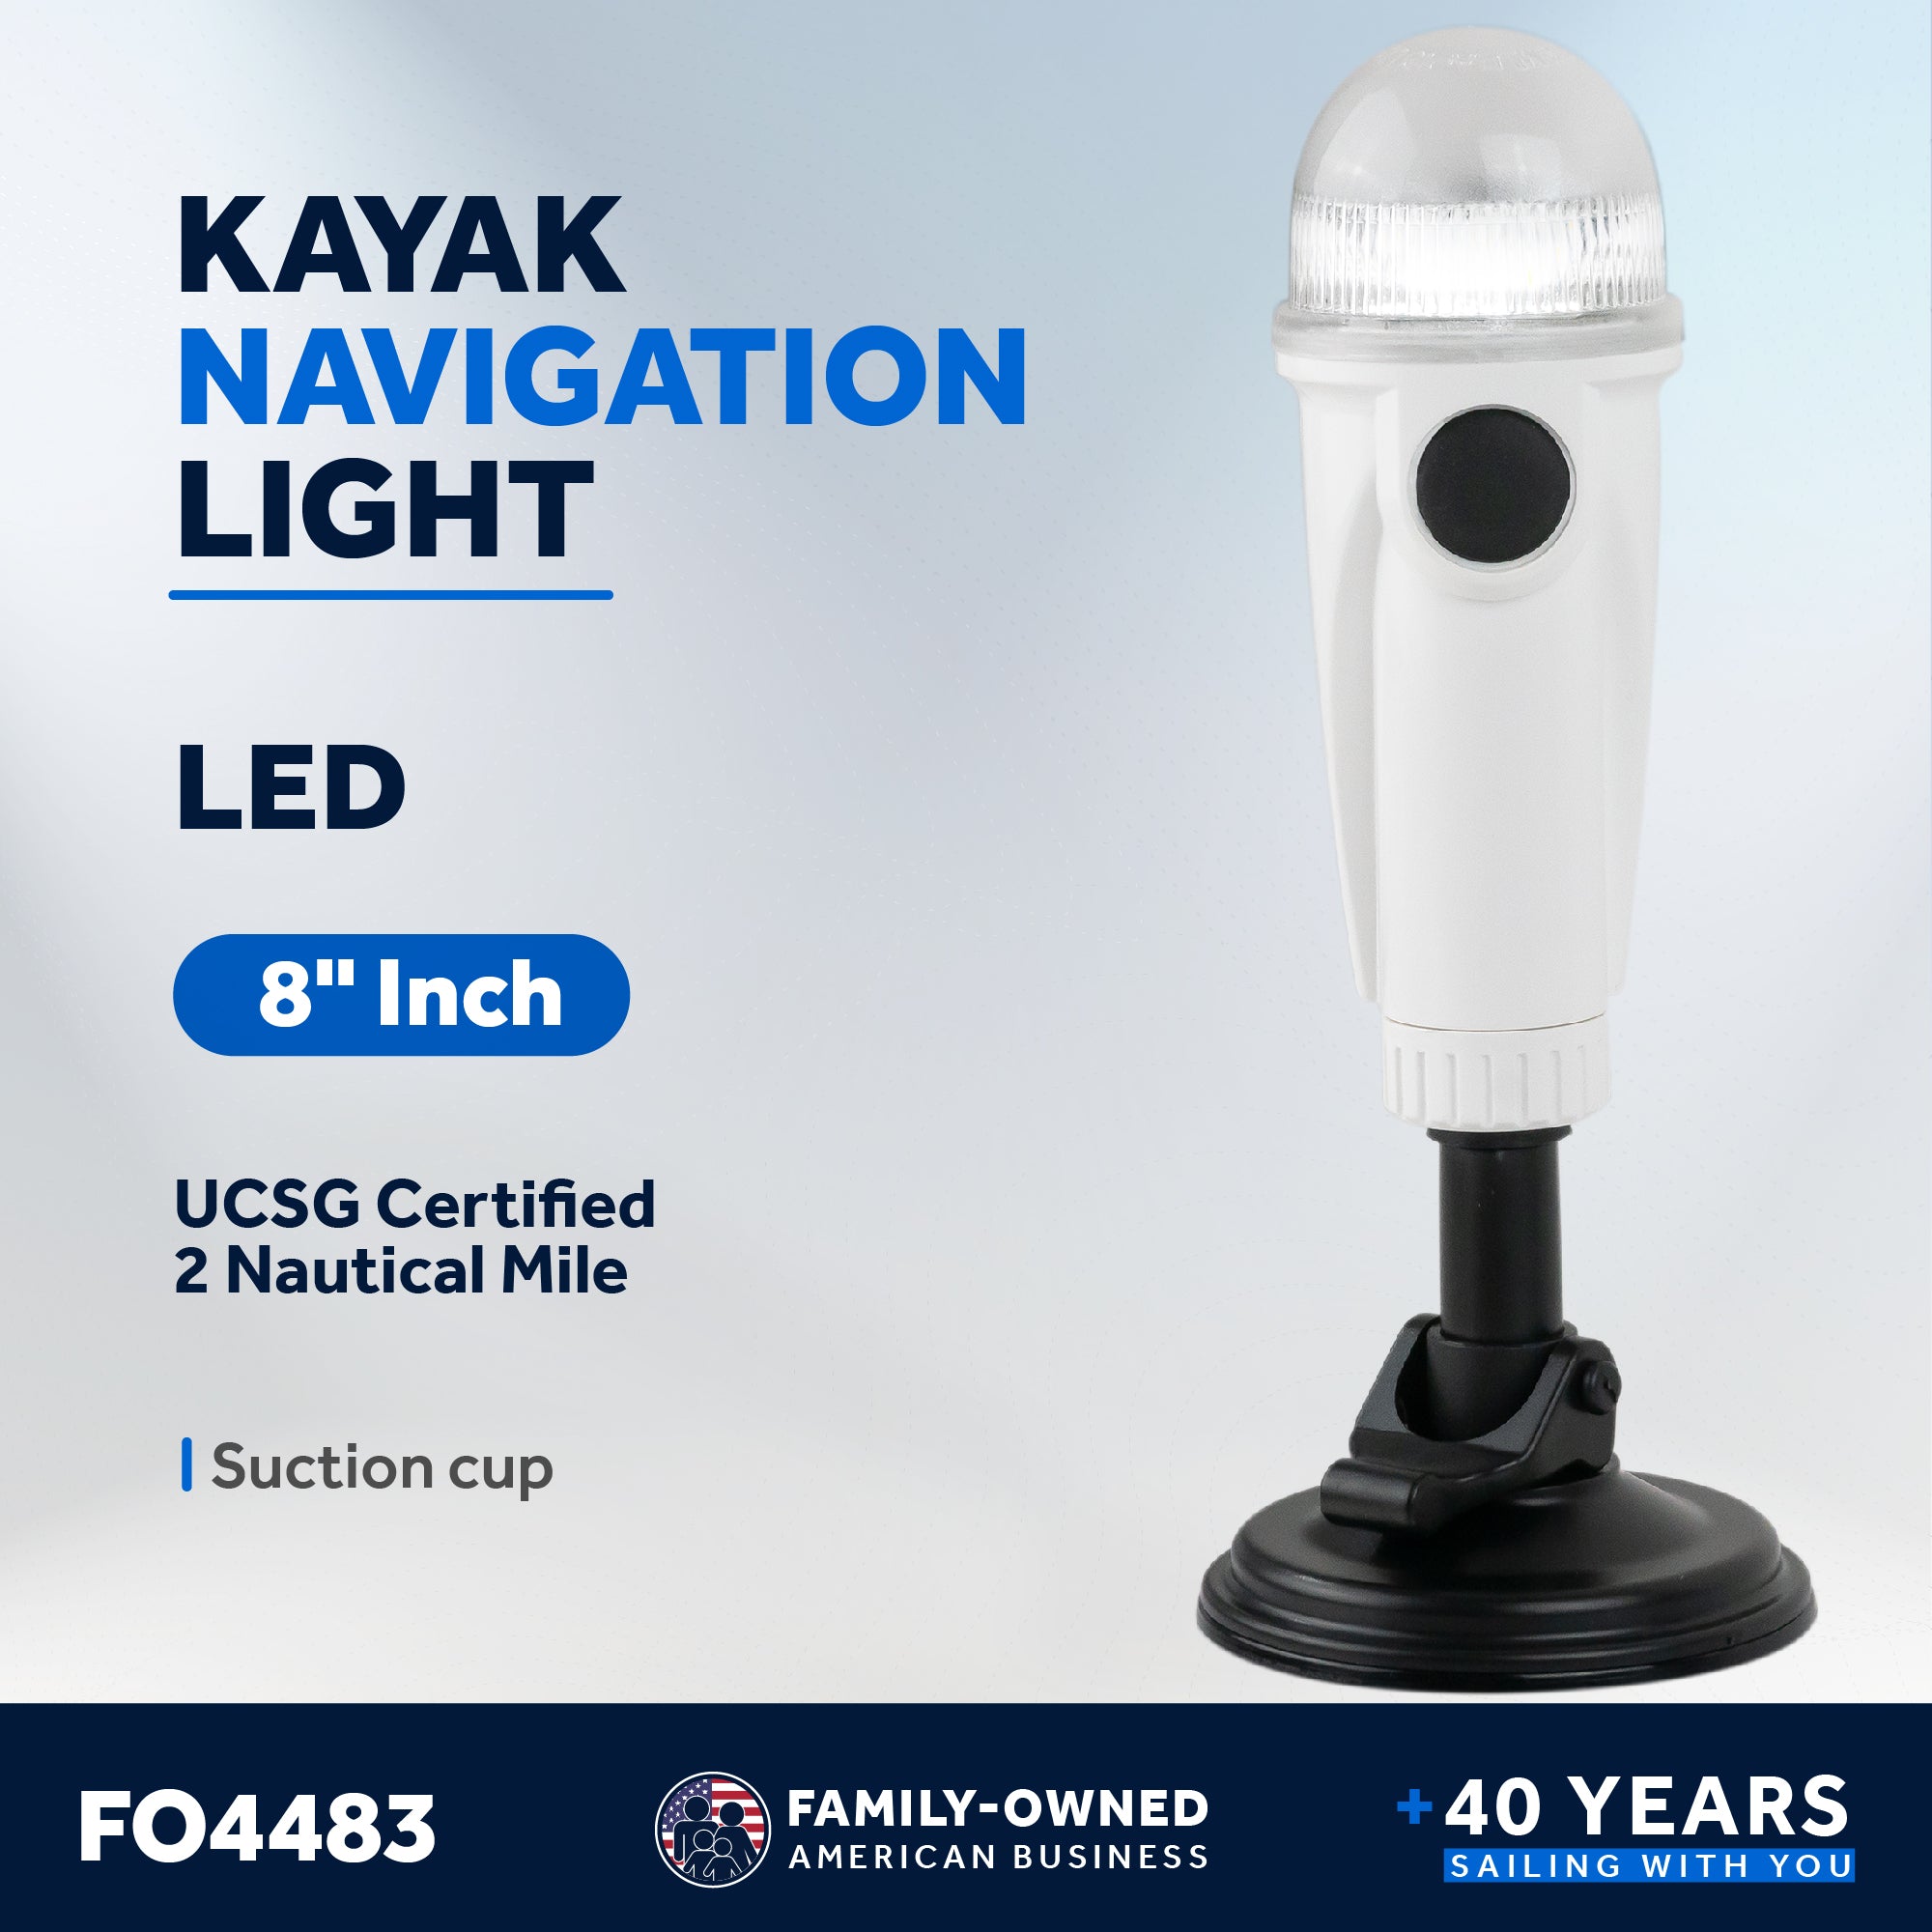 LED Anchor Navigation Light with Suction Cup, 8" - FO4483